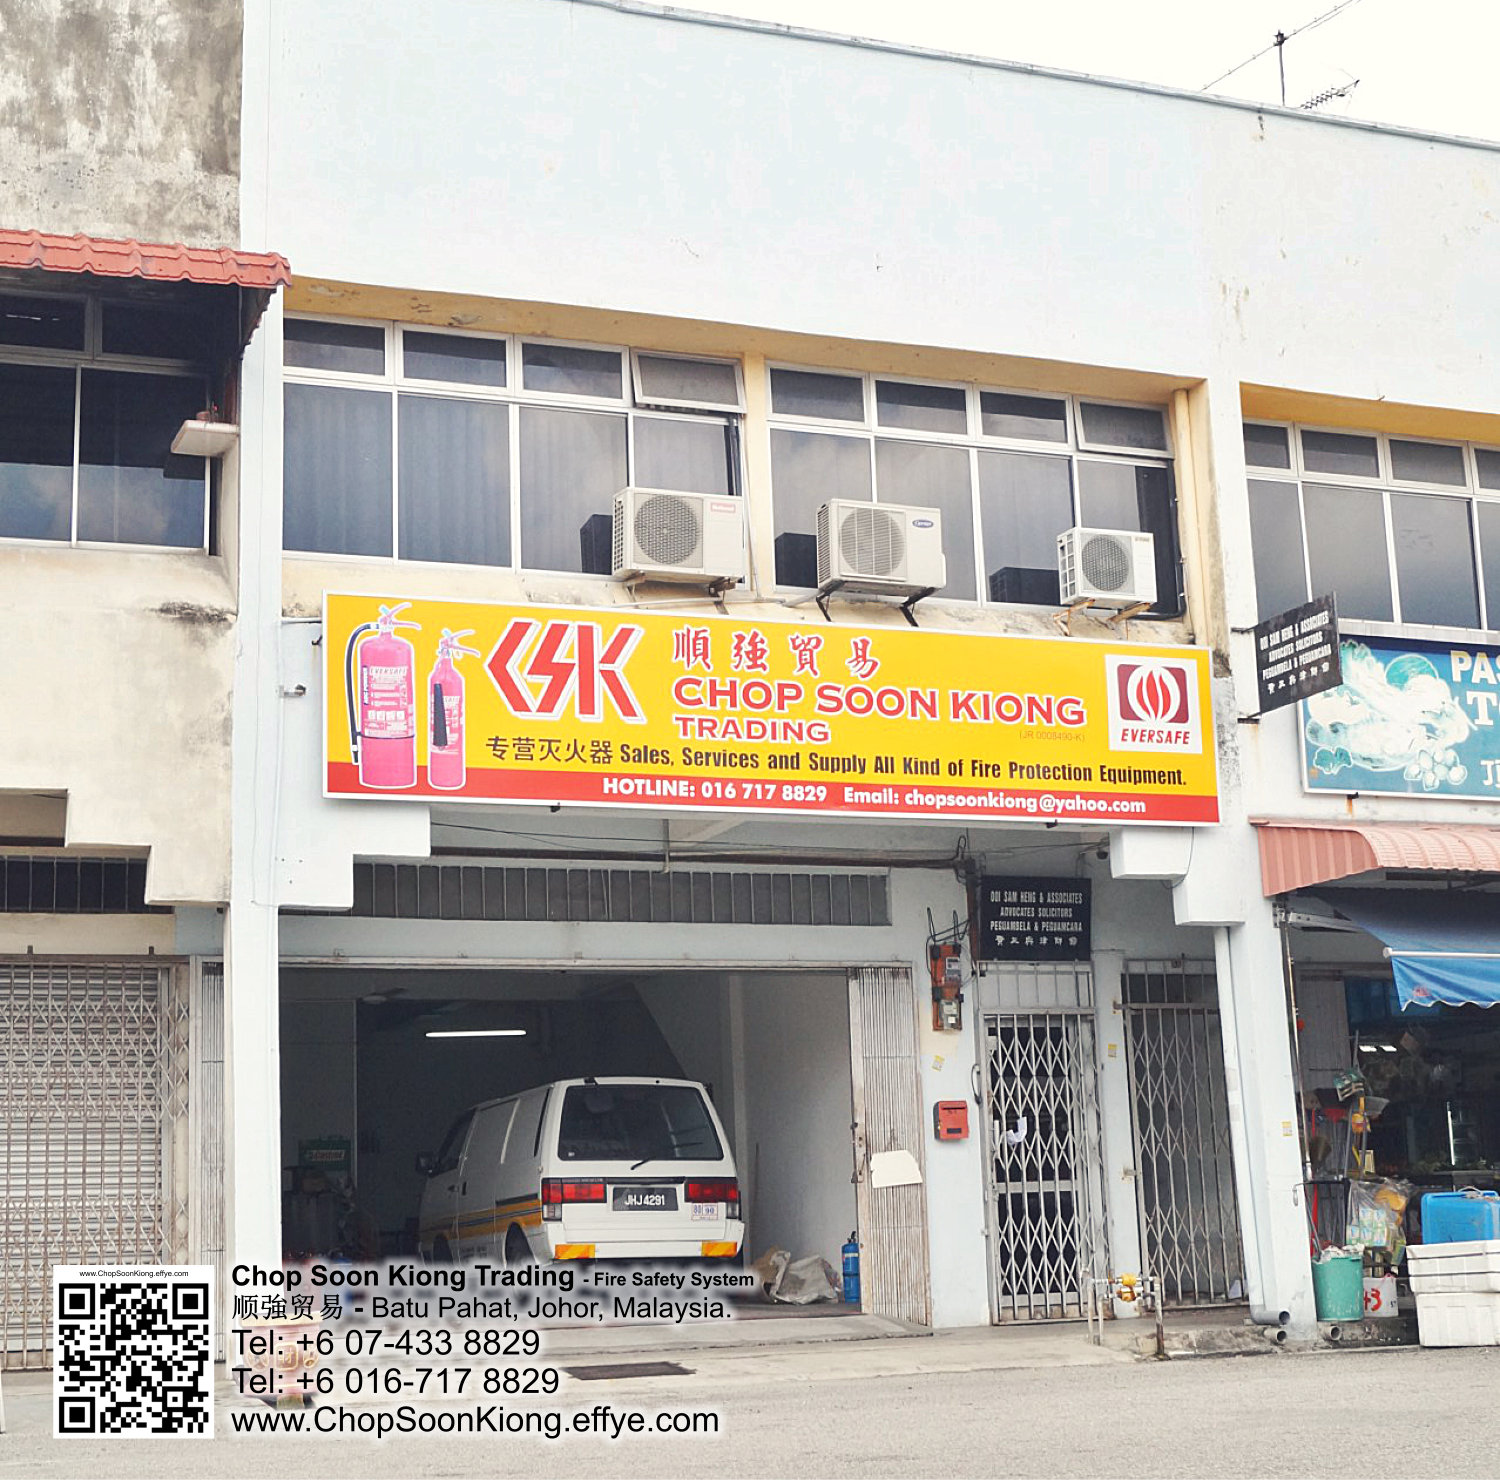 A01-Malaysia-Johor-BP-Batu-Pahat-Fire-Extinguisher-Prevention-Equipment-Chop-Soon-Kiong-Trading-顺強贸易-Safety-Somke-Alarm-Fire-Prevention-Protection-Fire-Hose-Reel-Bomba-灭火器